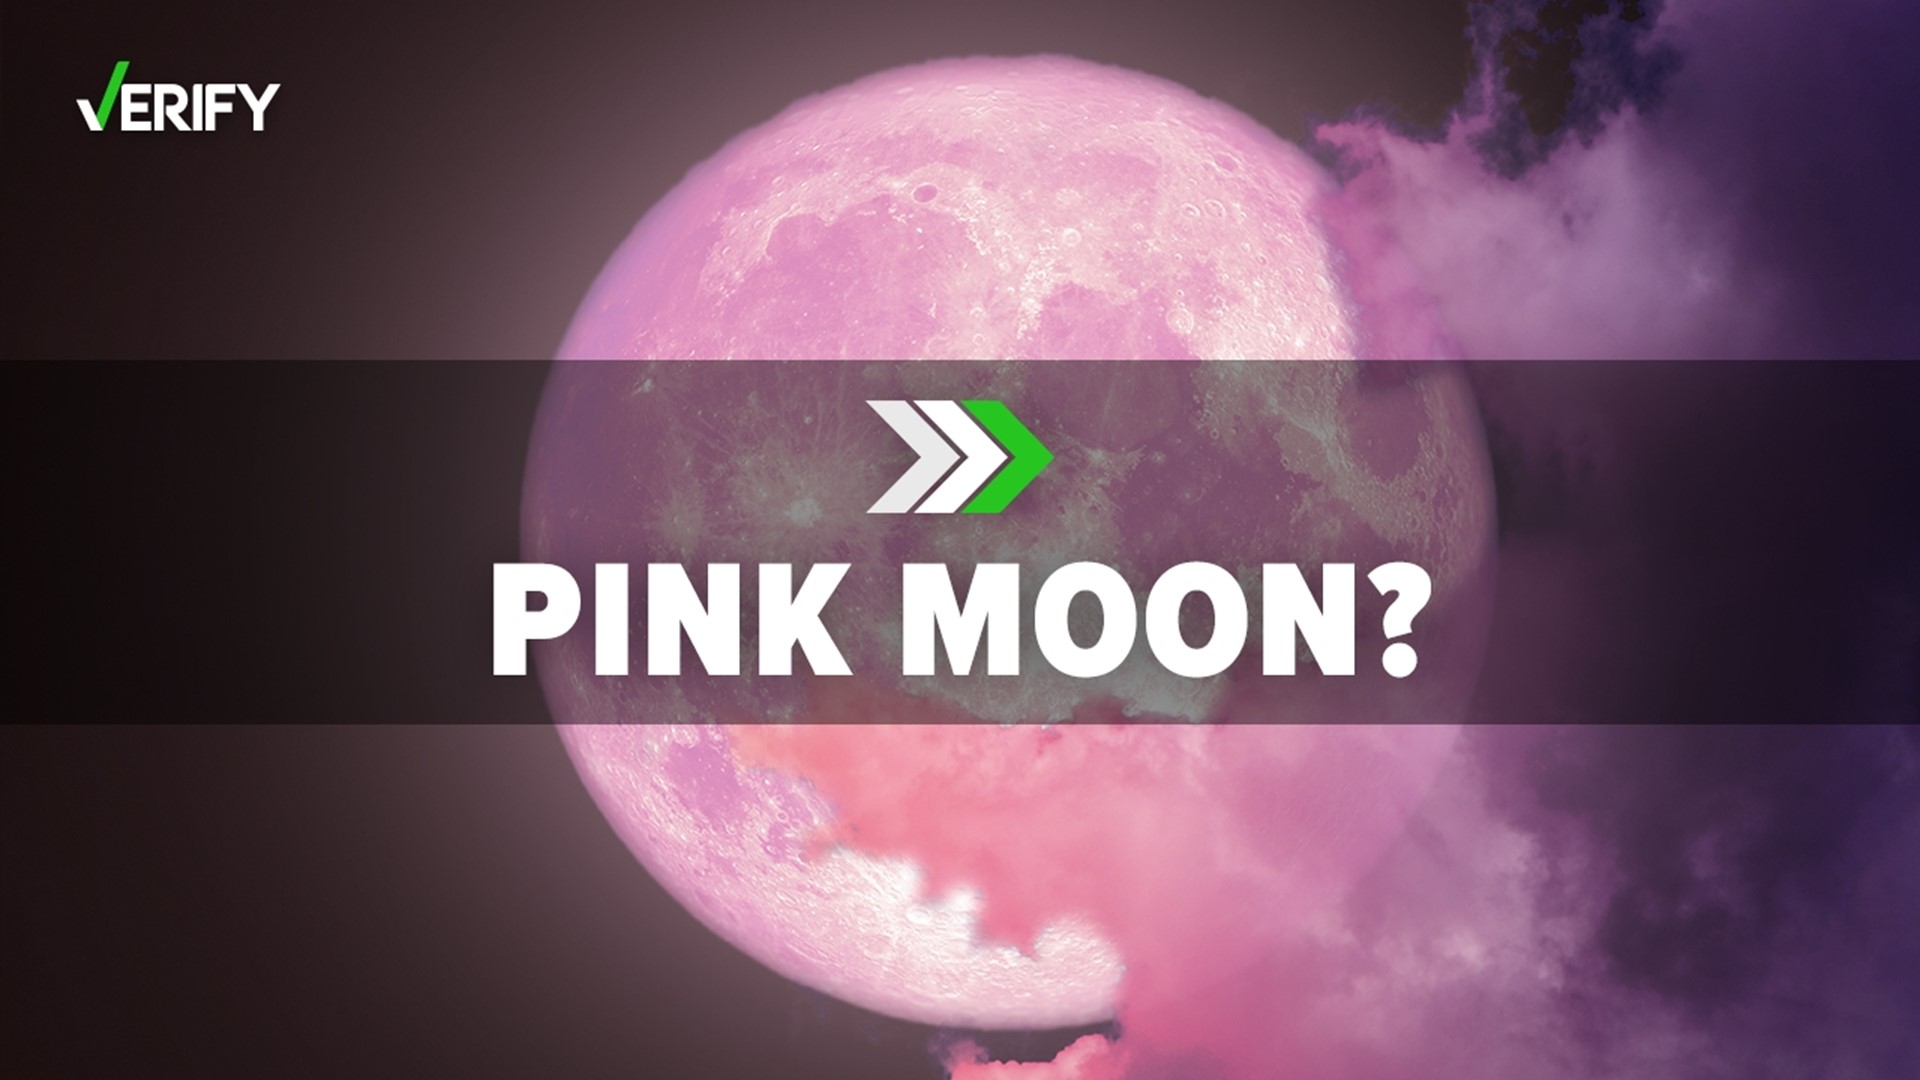 Will the moon actually look pink like these posts on social media depict? The VERIFY team confirms this is false.